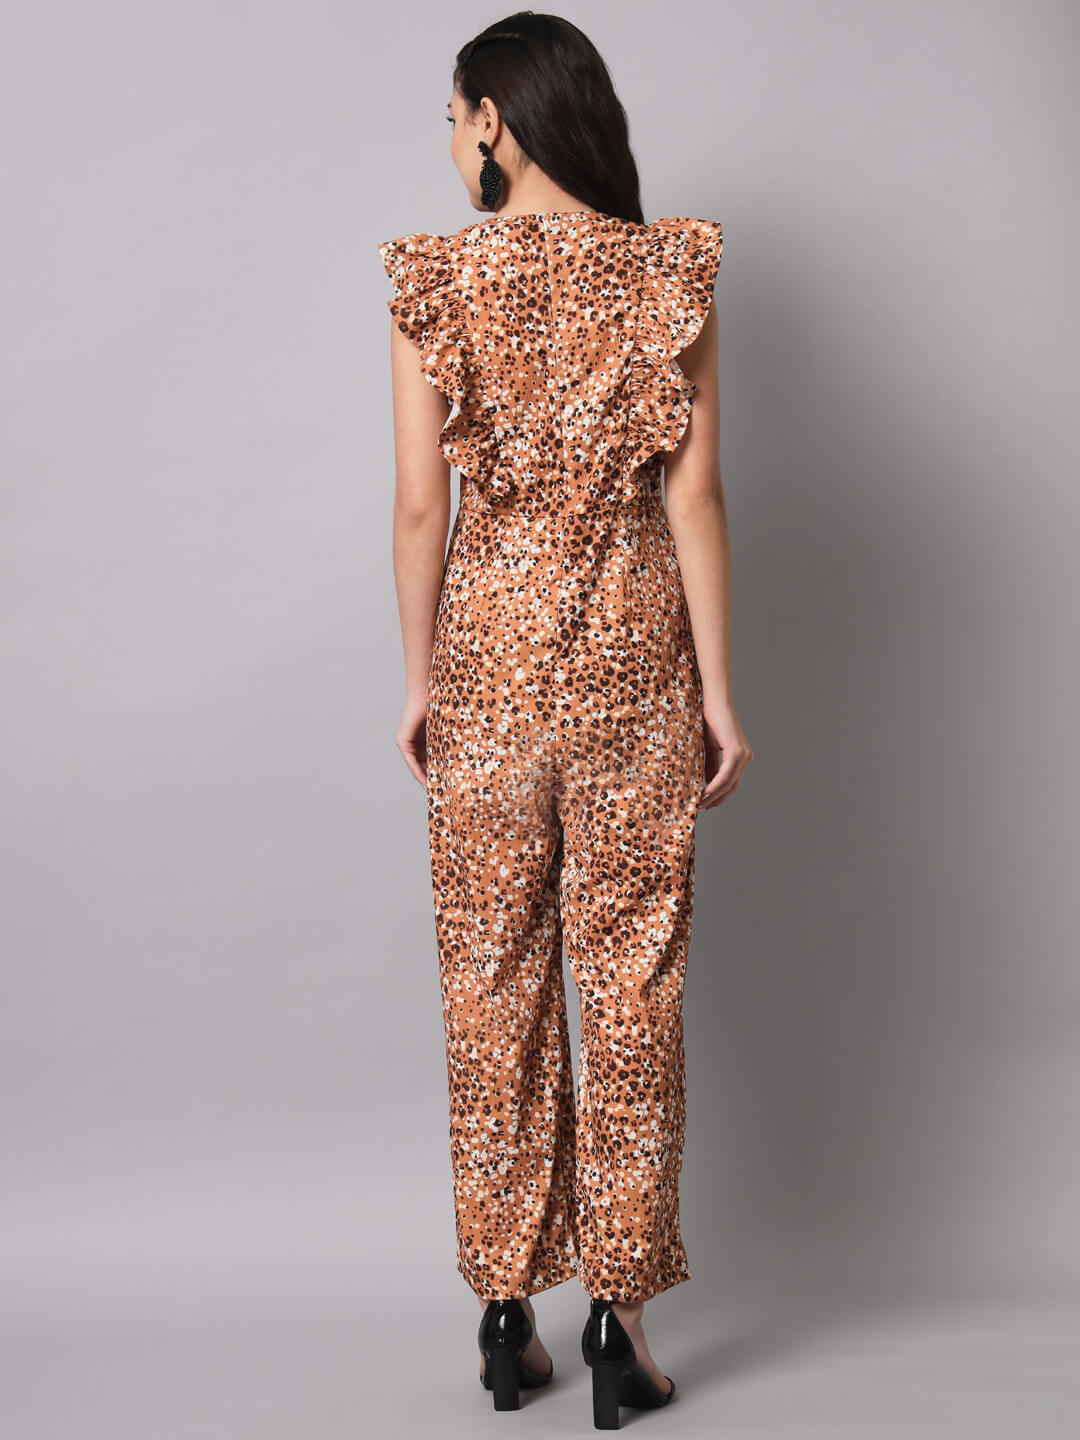 Casual Animal Printed Frill Jumpsuit